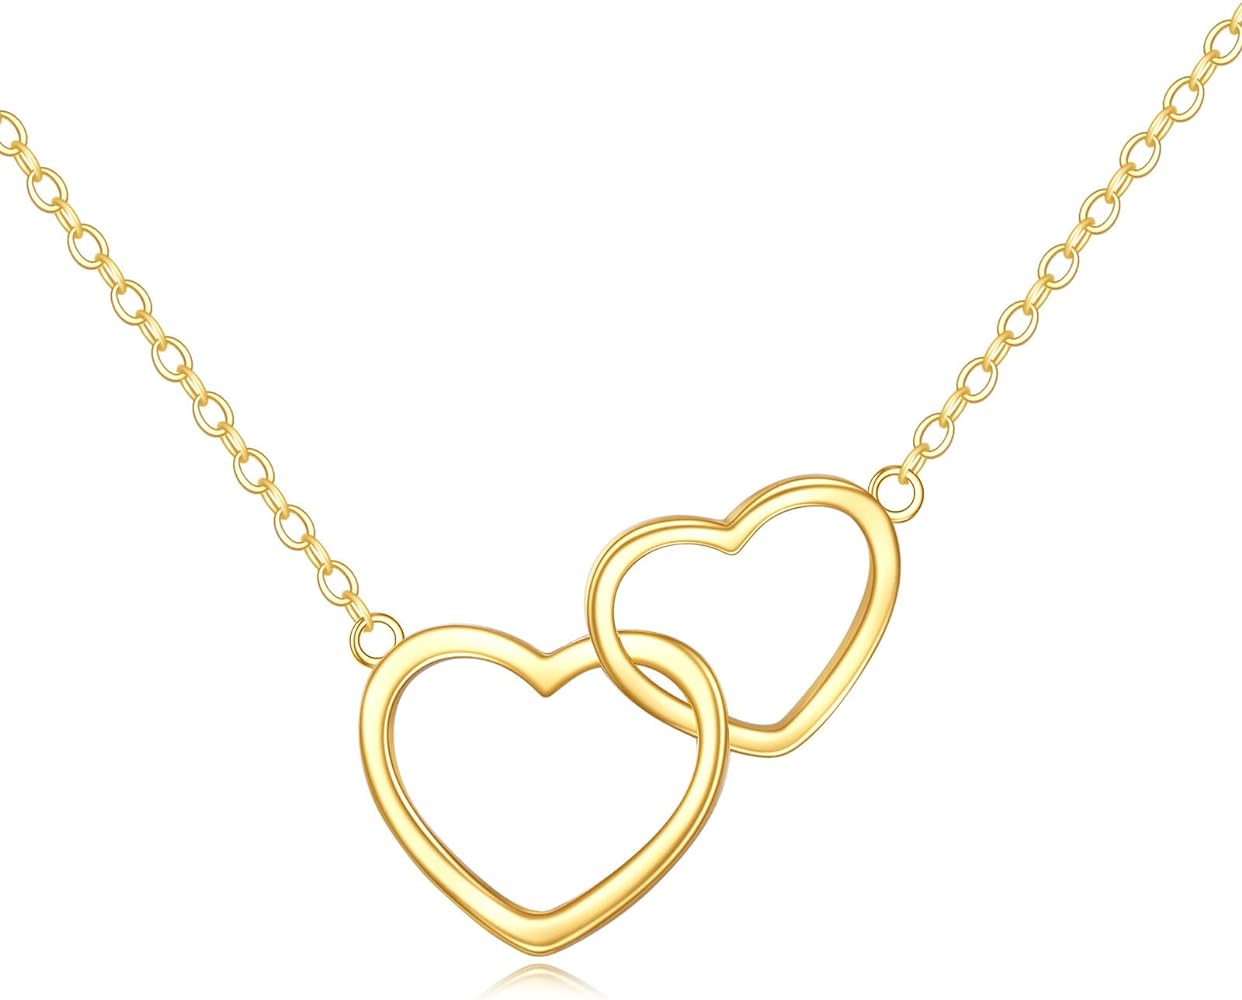 14k Gold Heart Necklace for Women, Fine Gold Pendant Jewelry Birthday Gifts for Wife/Mom/Girlfriend